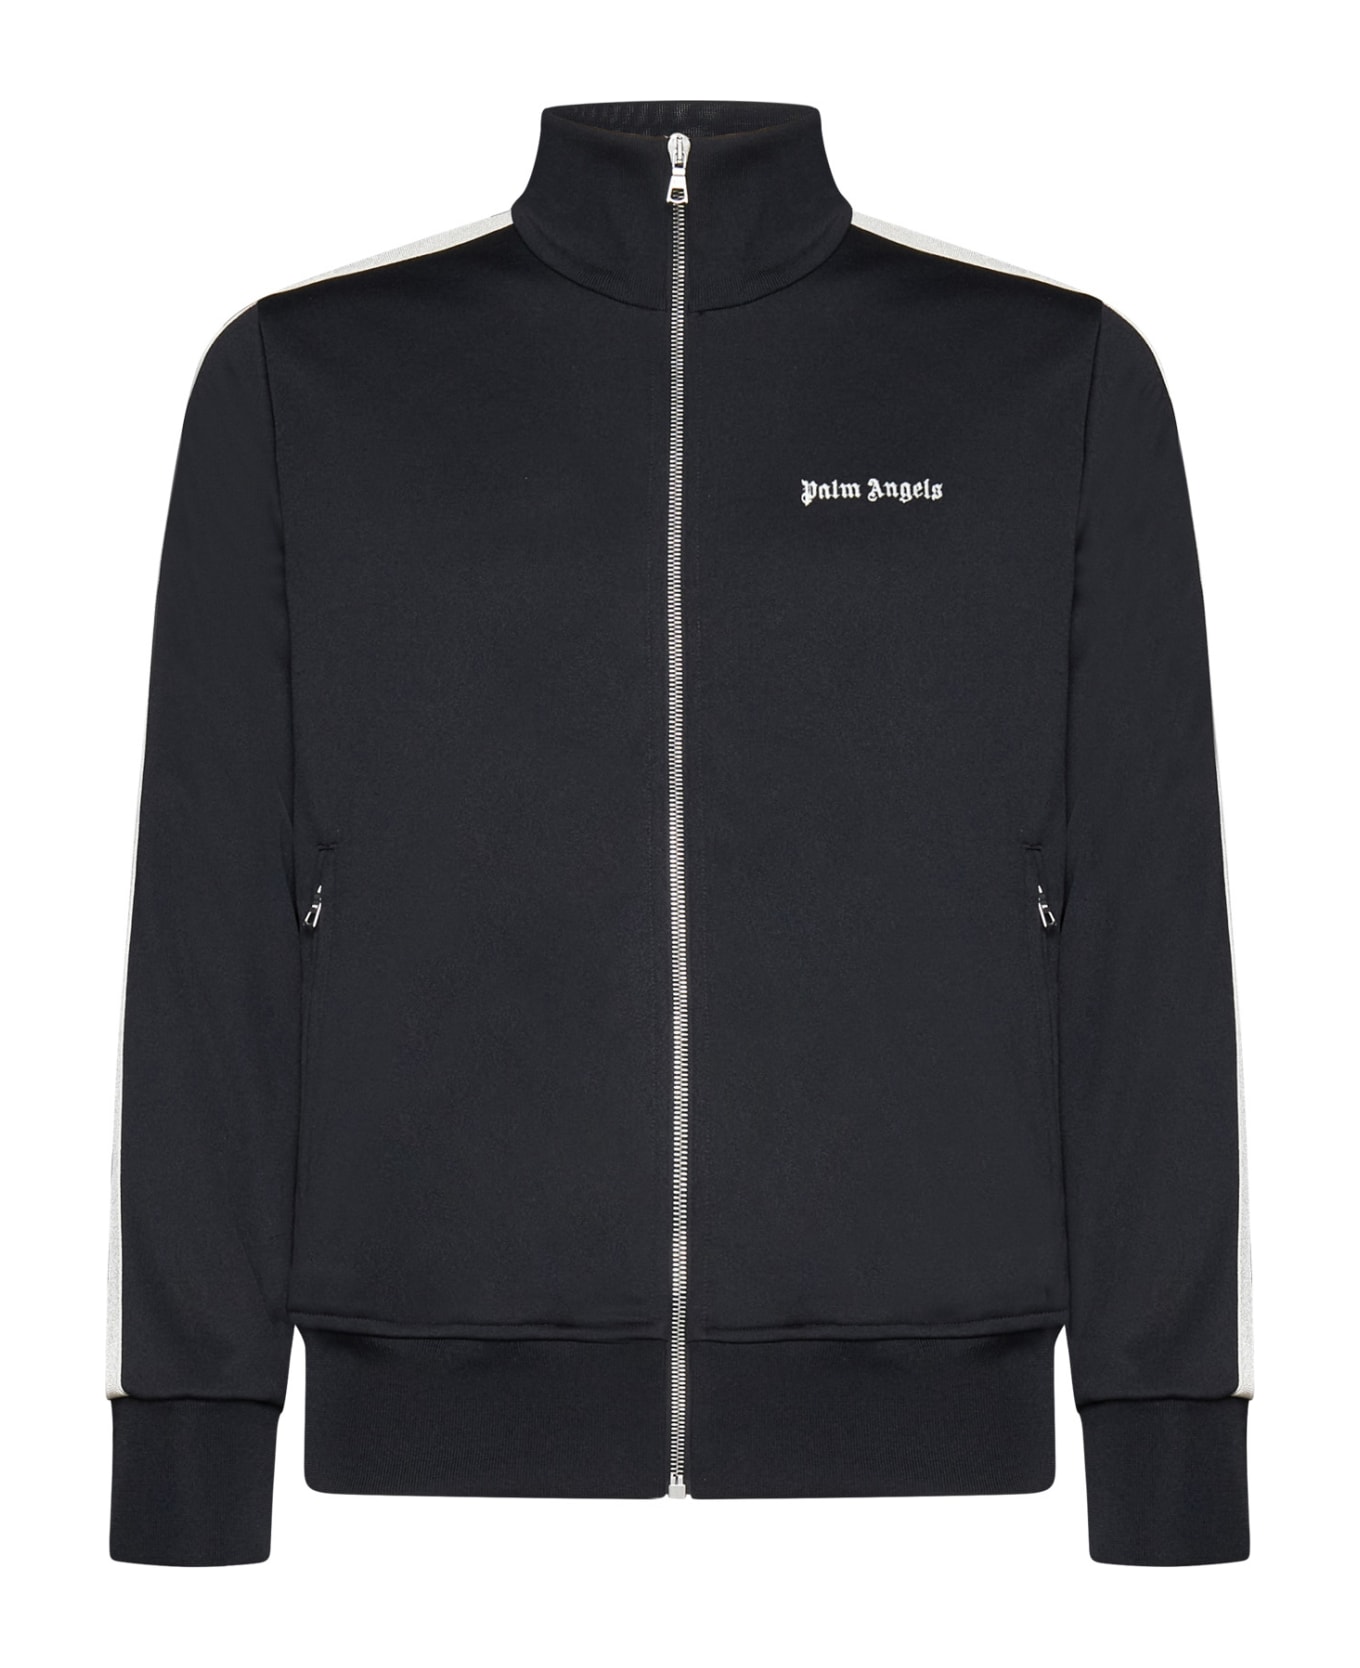 Palm Angels New Classic Track Jacket - Black Whit